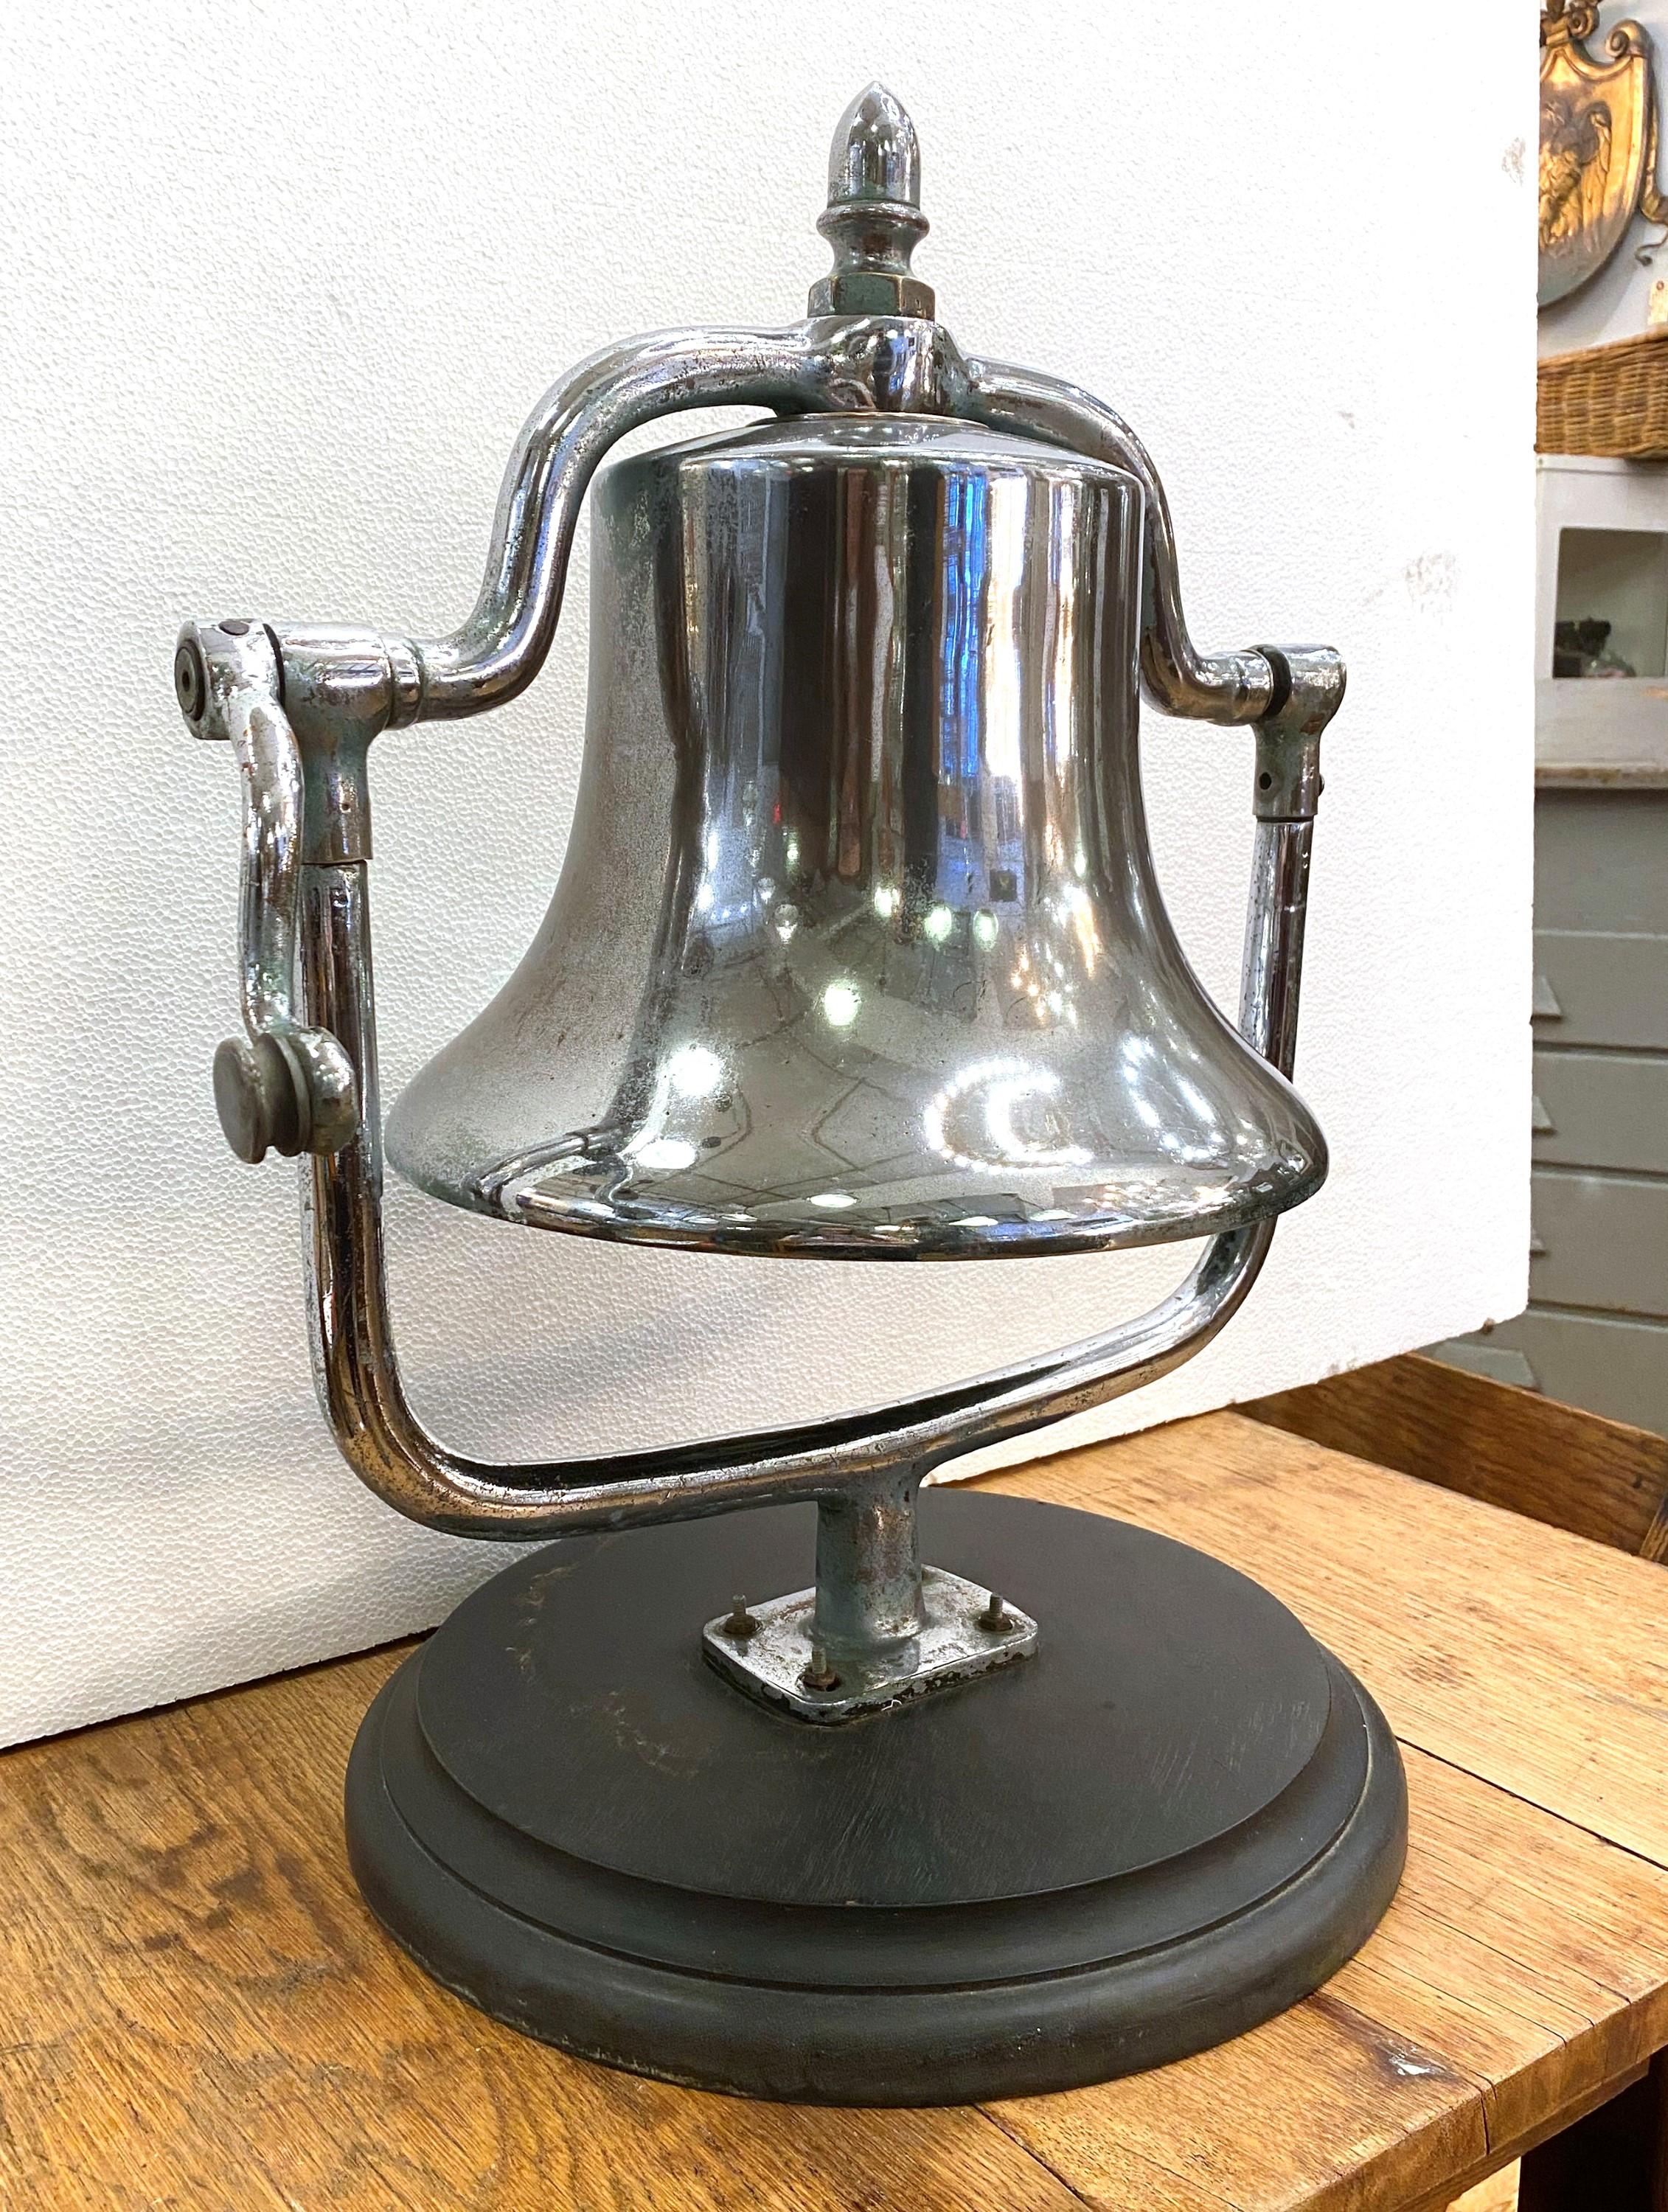 This antique bronze tabletop fire engine bell with a wood base is a rare find. Its nickel-plated bronze construction exudes vintage charm, making it a striking and collectible centerpiece for any fireman's home. It is in very good condition, with a